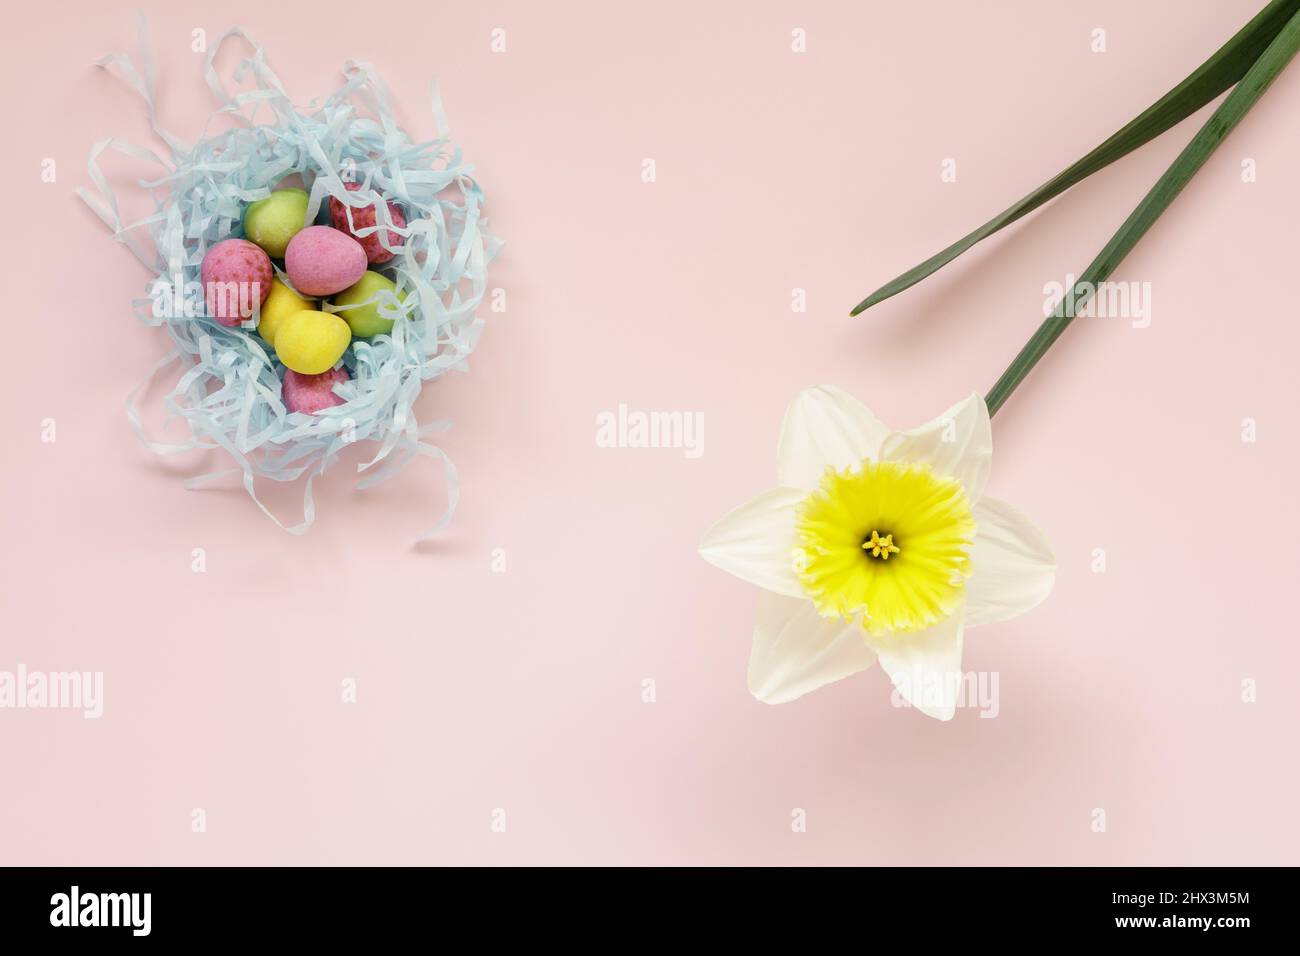 Single Daffodil with mini chocolate eggs on pink background Stock Photo